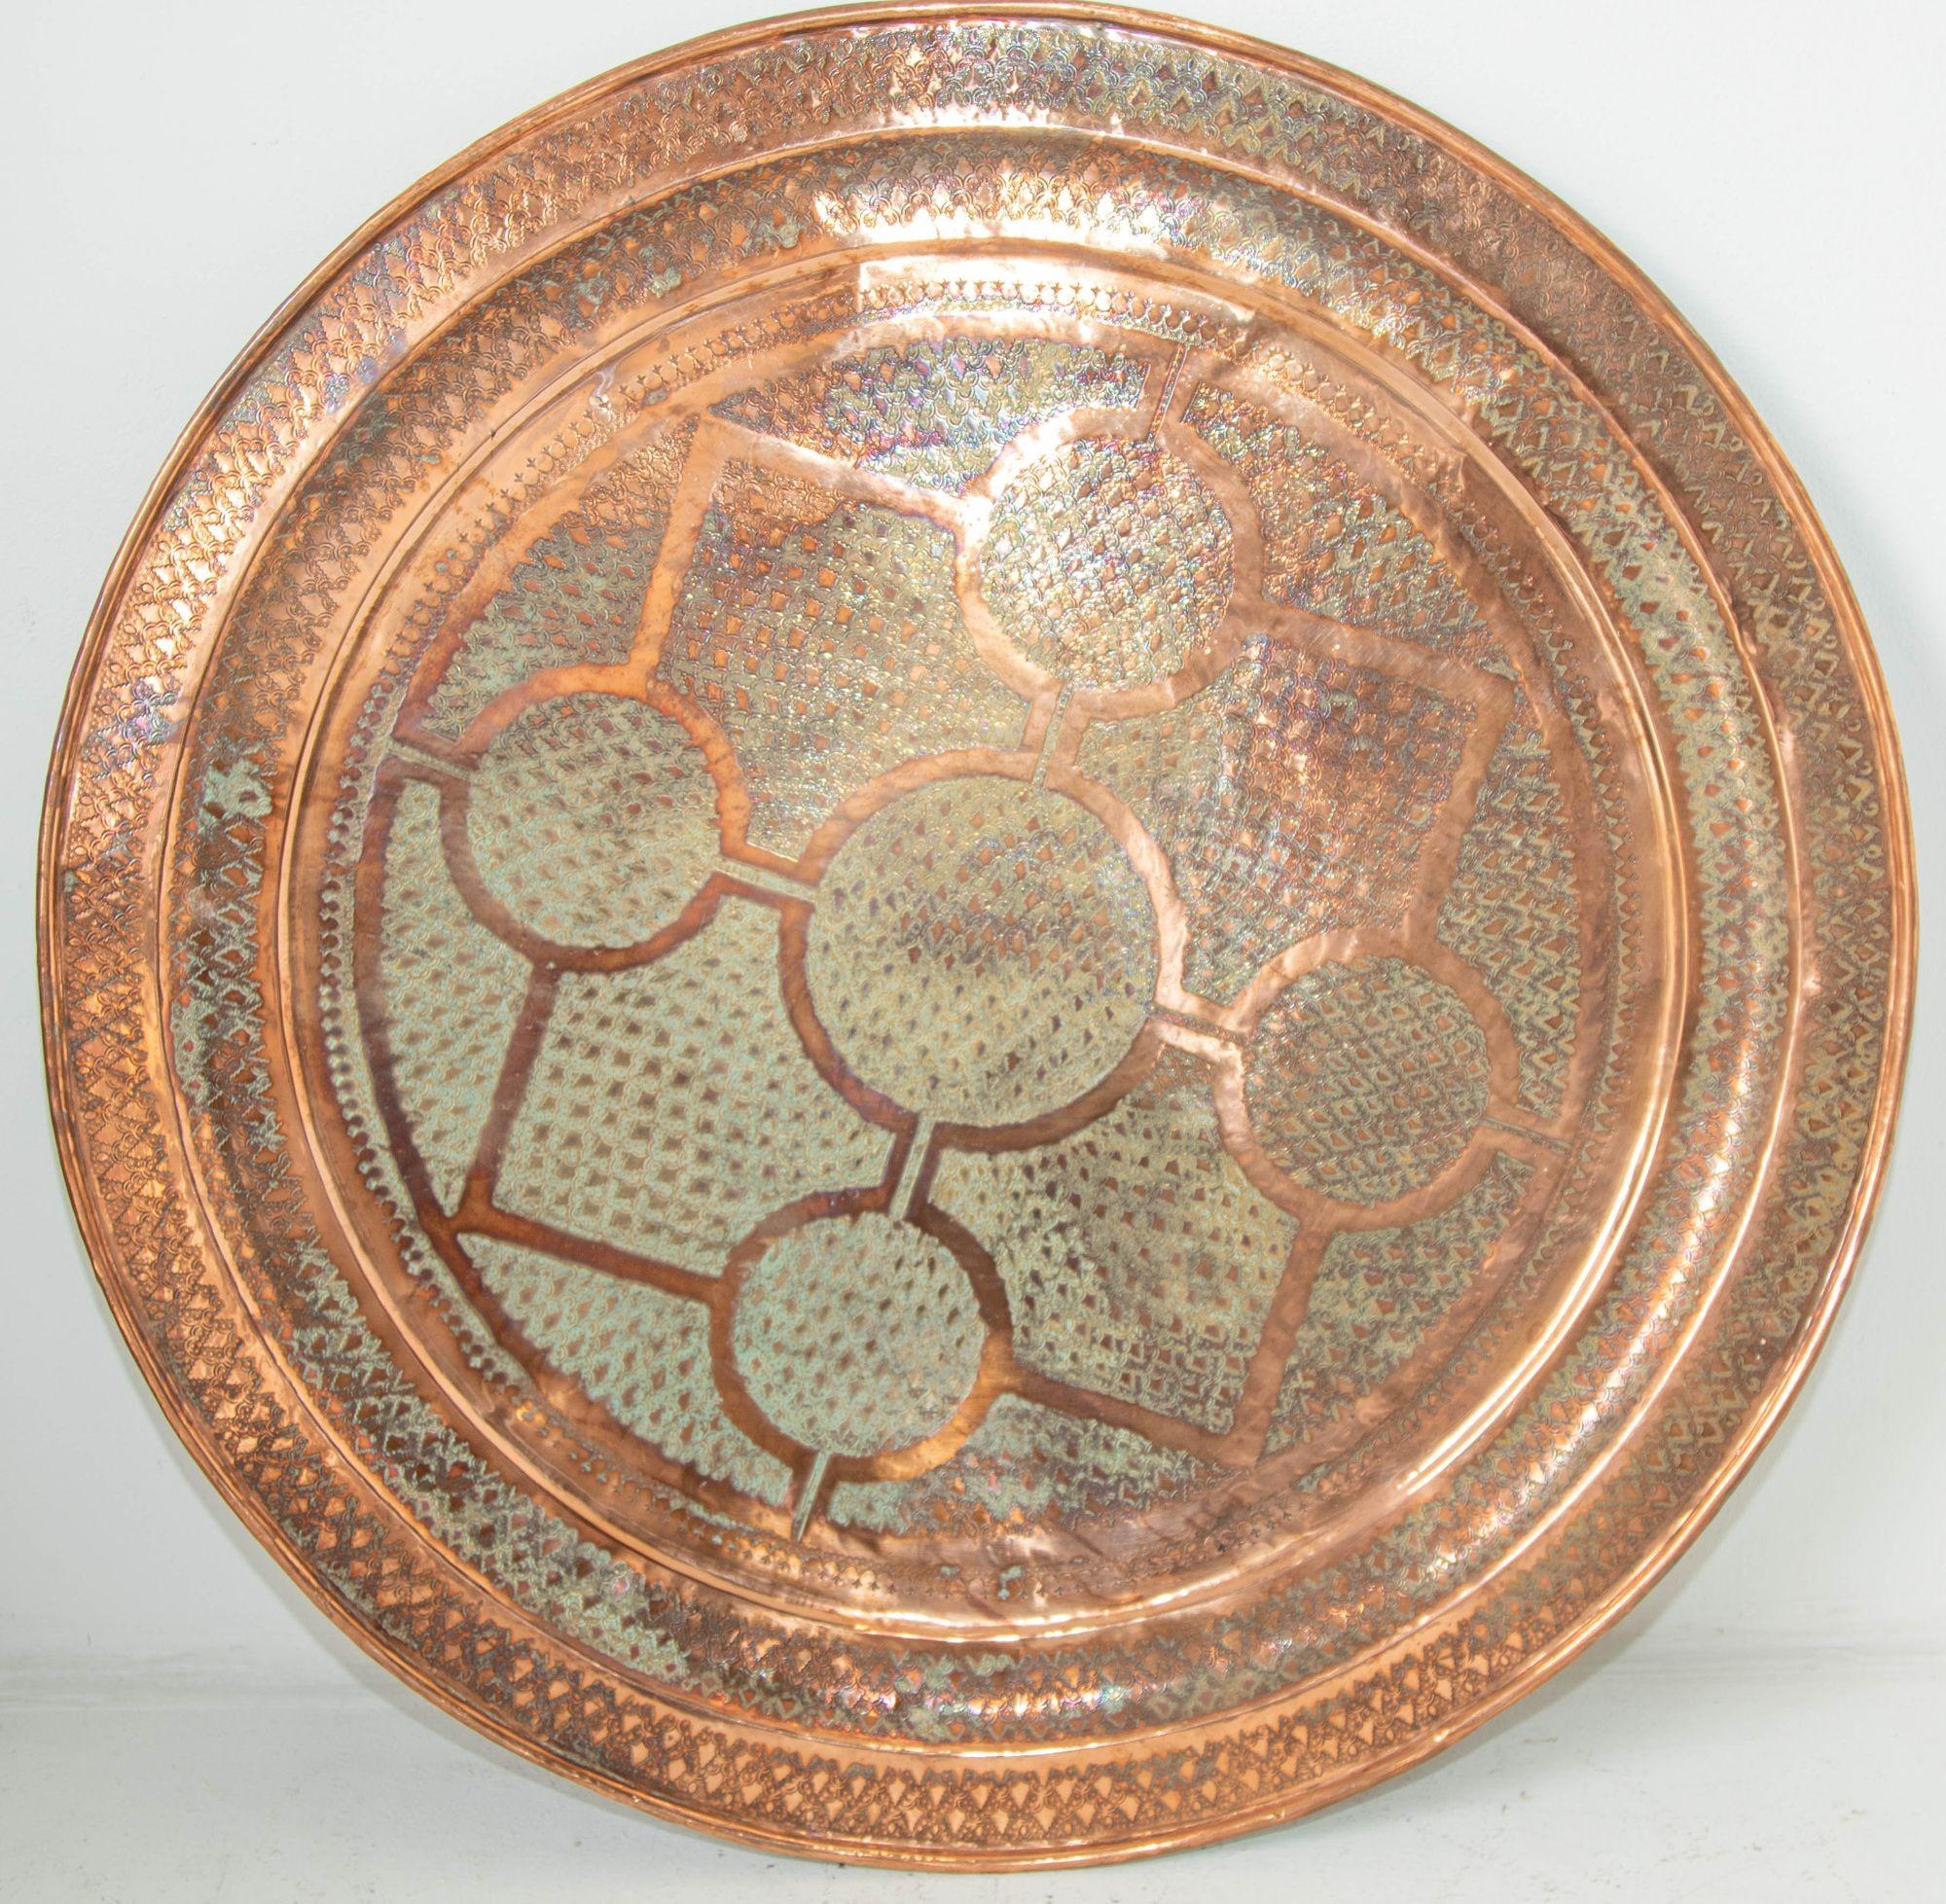 Antique hand tooled huge collectible Moroccan metal copper tray platter charger, 38 inches diameter. Circa 1920's.
Stunning antique huge handcrafted Moroccan heavy solid polished copper charger platter all hand tooled in exquisite geometric designs.